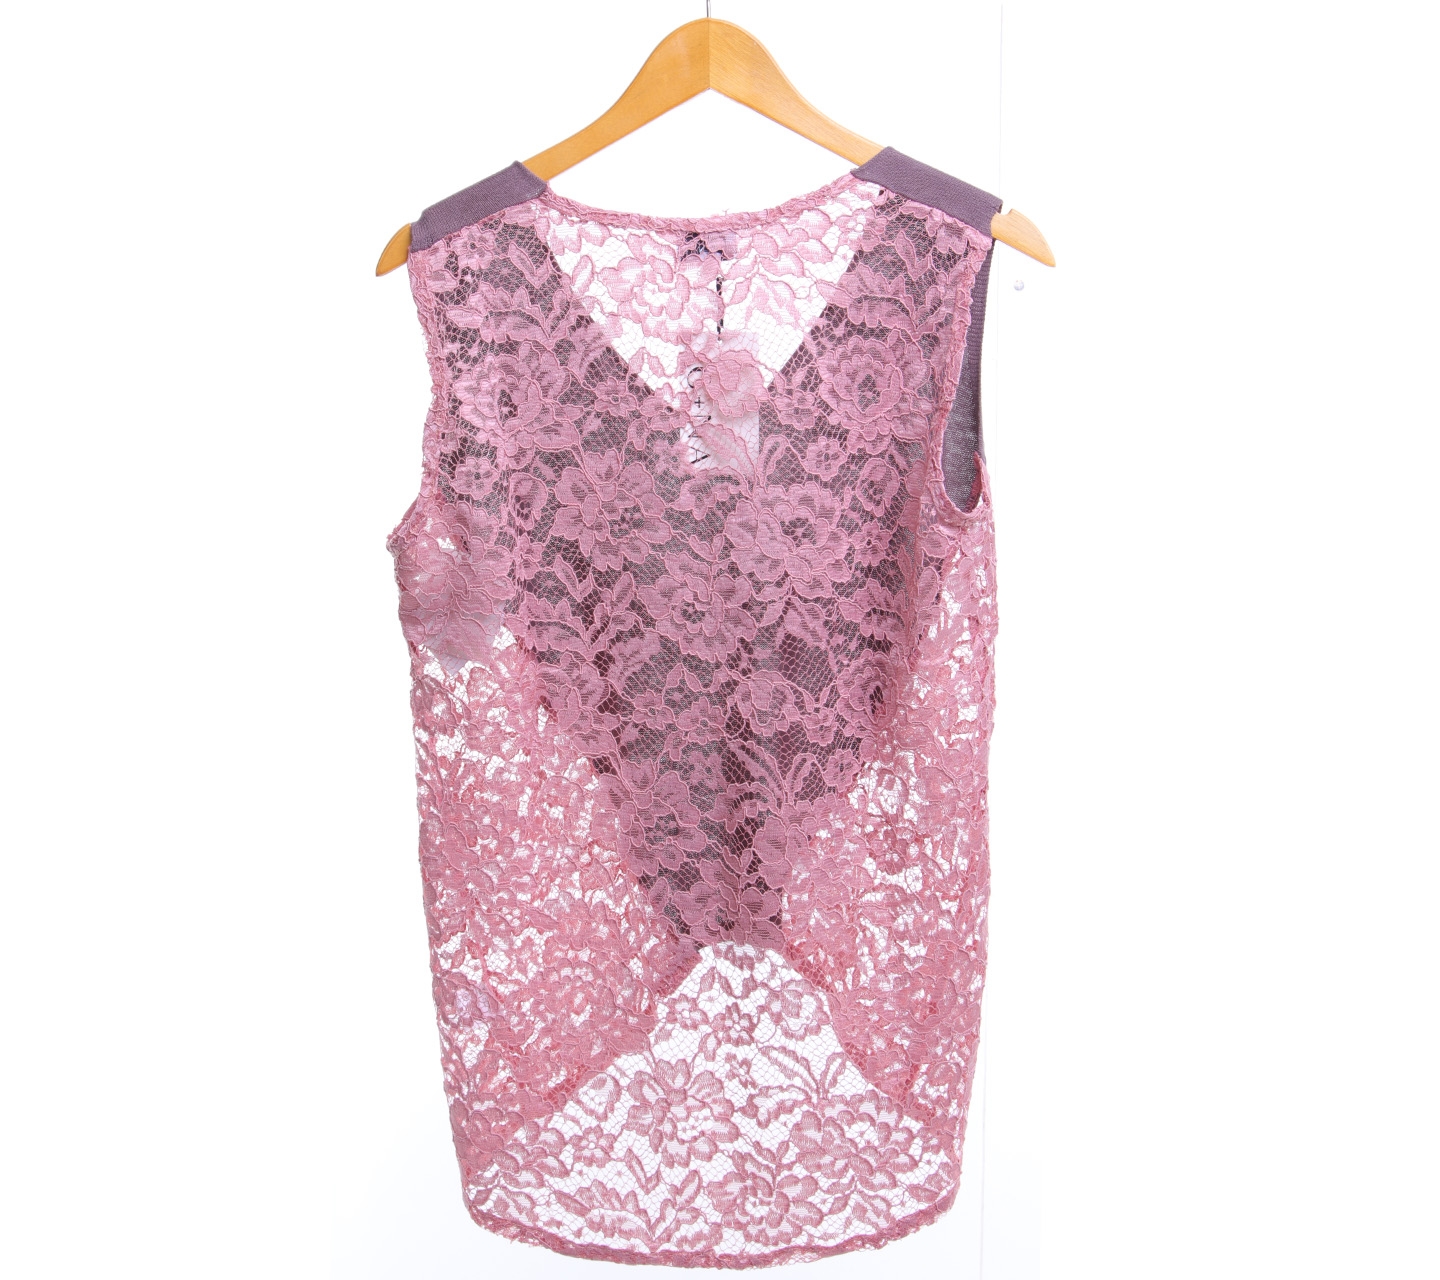 G+NA Pink And Brown Lace Sleeveless